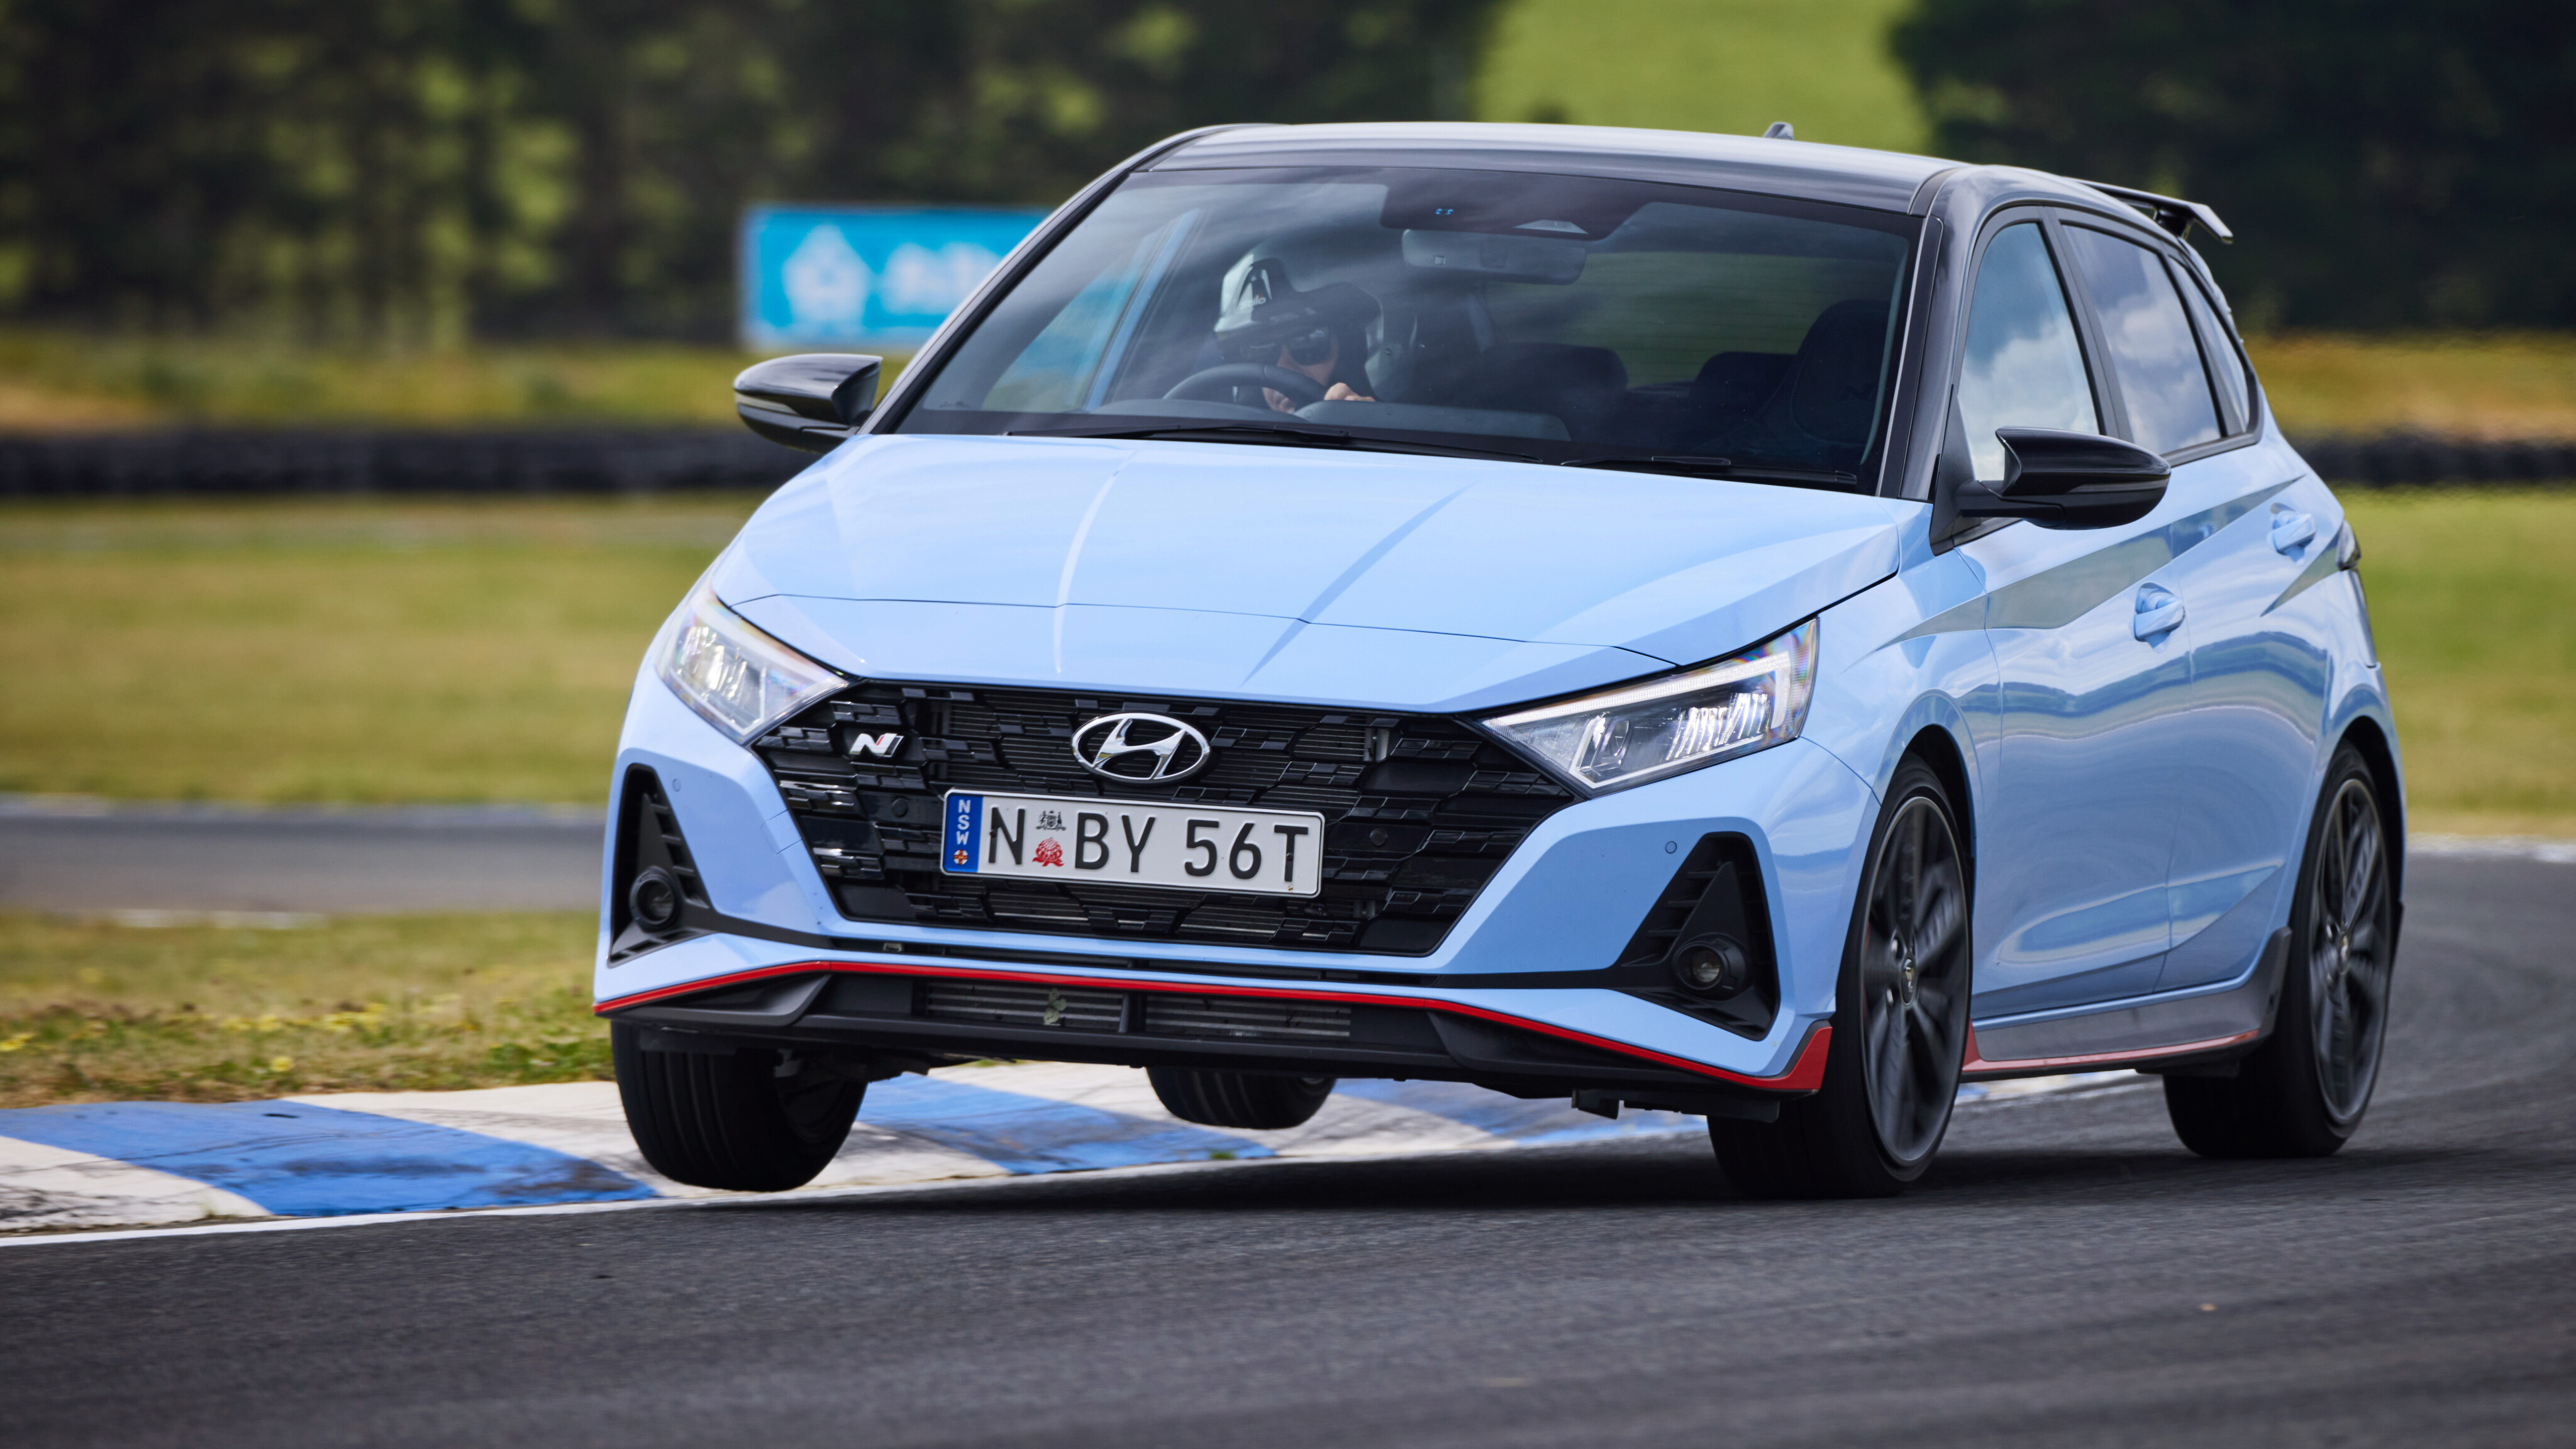 Hyundai N - Track Day with N : D-Day (Part 2)